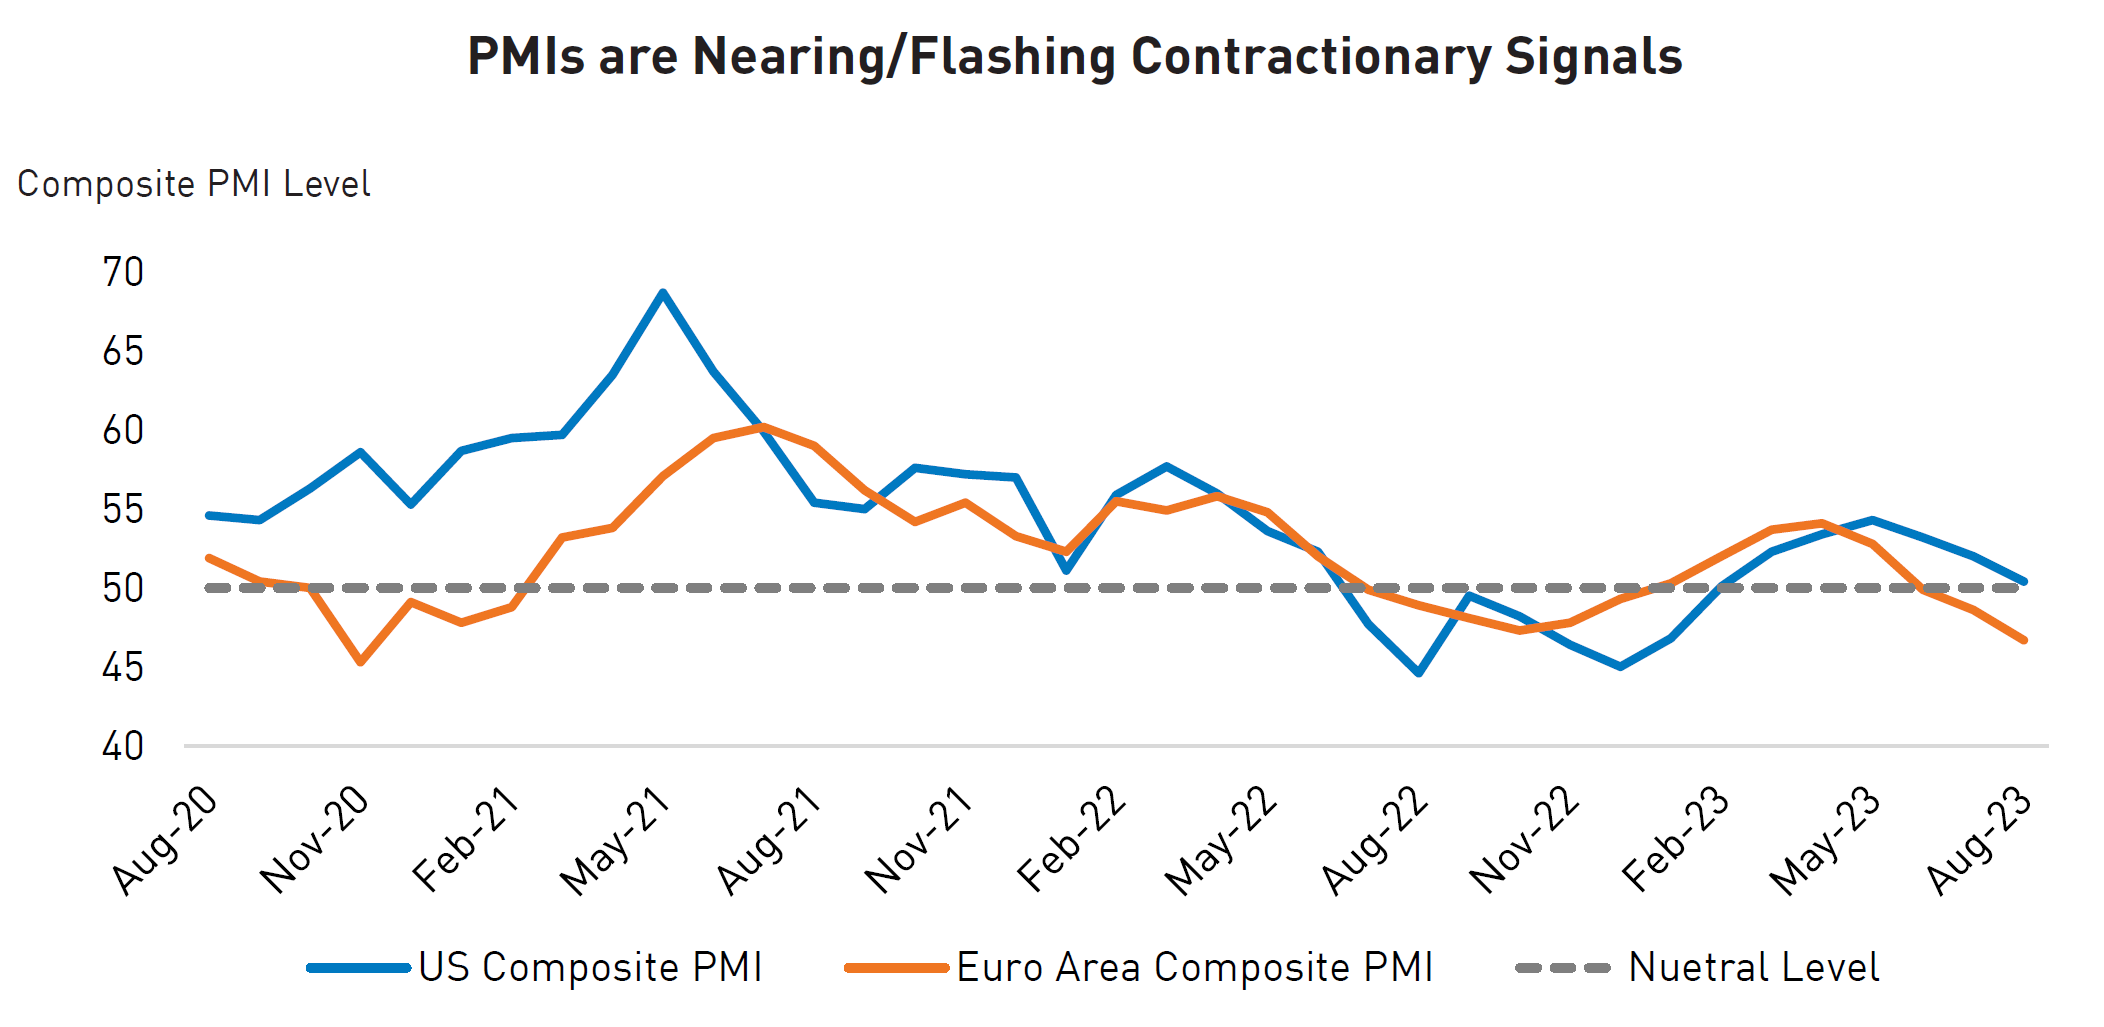 Chart Showing PMIs are Nearing/Flashing Contractionary Signals